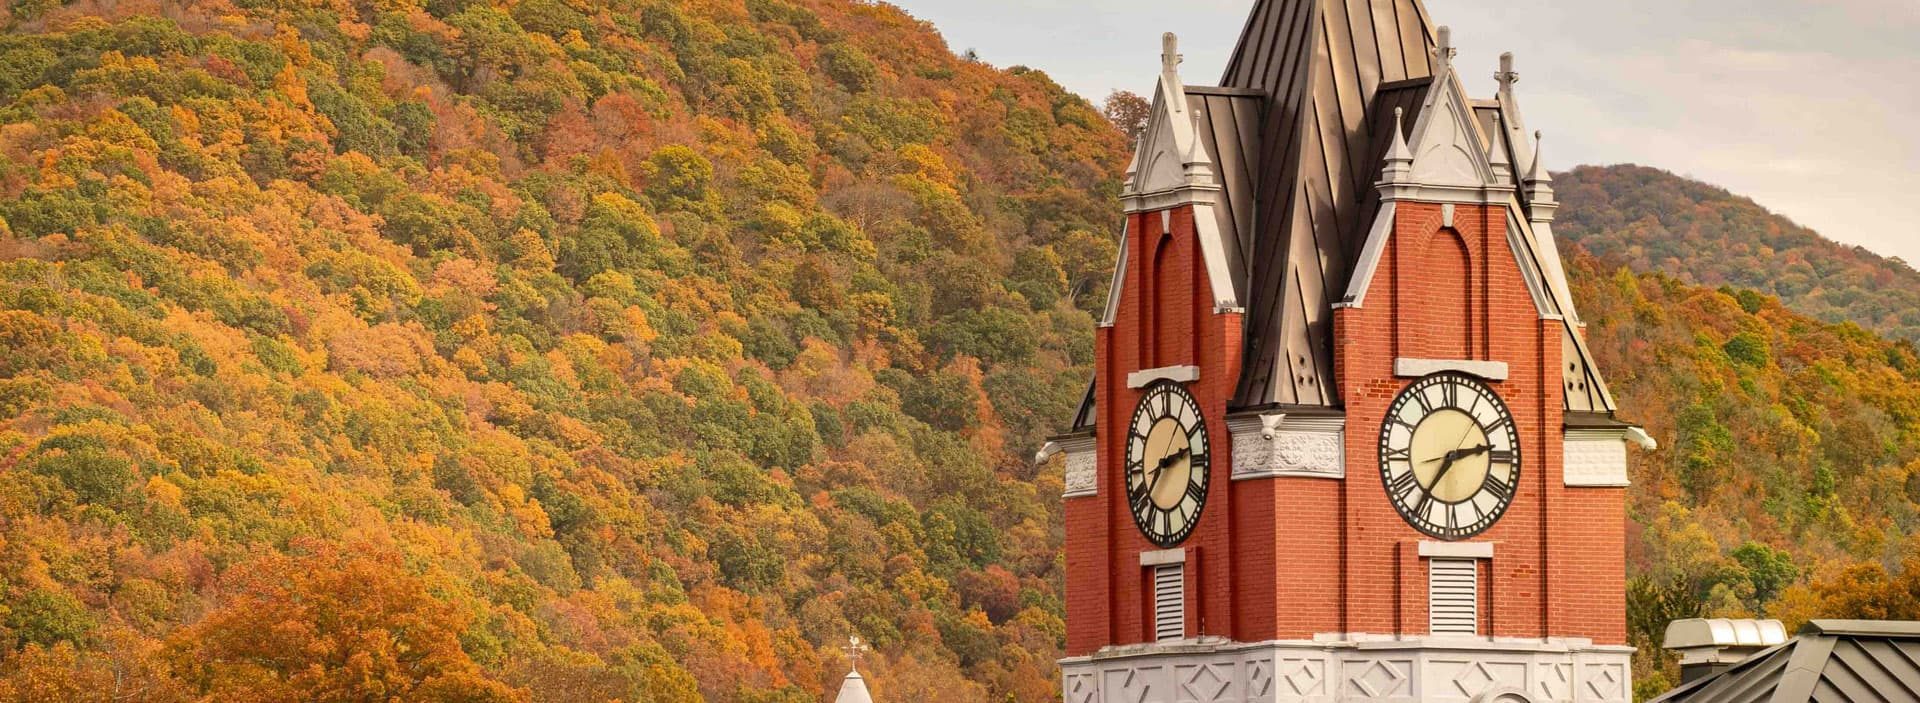 church in the fall mountains